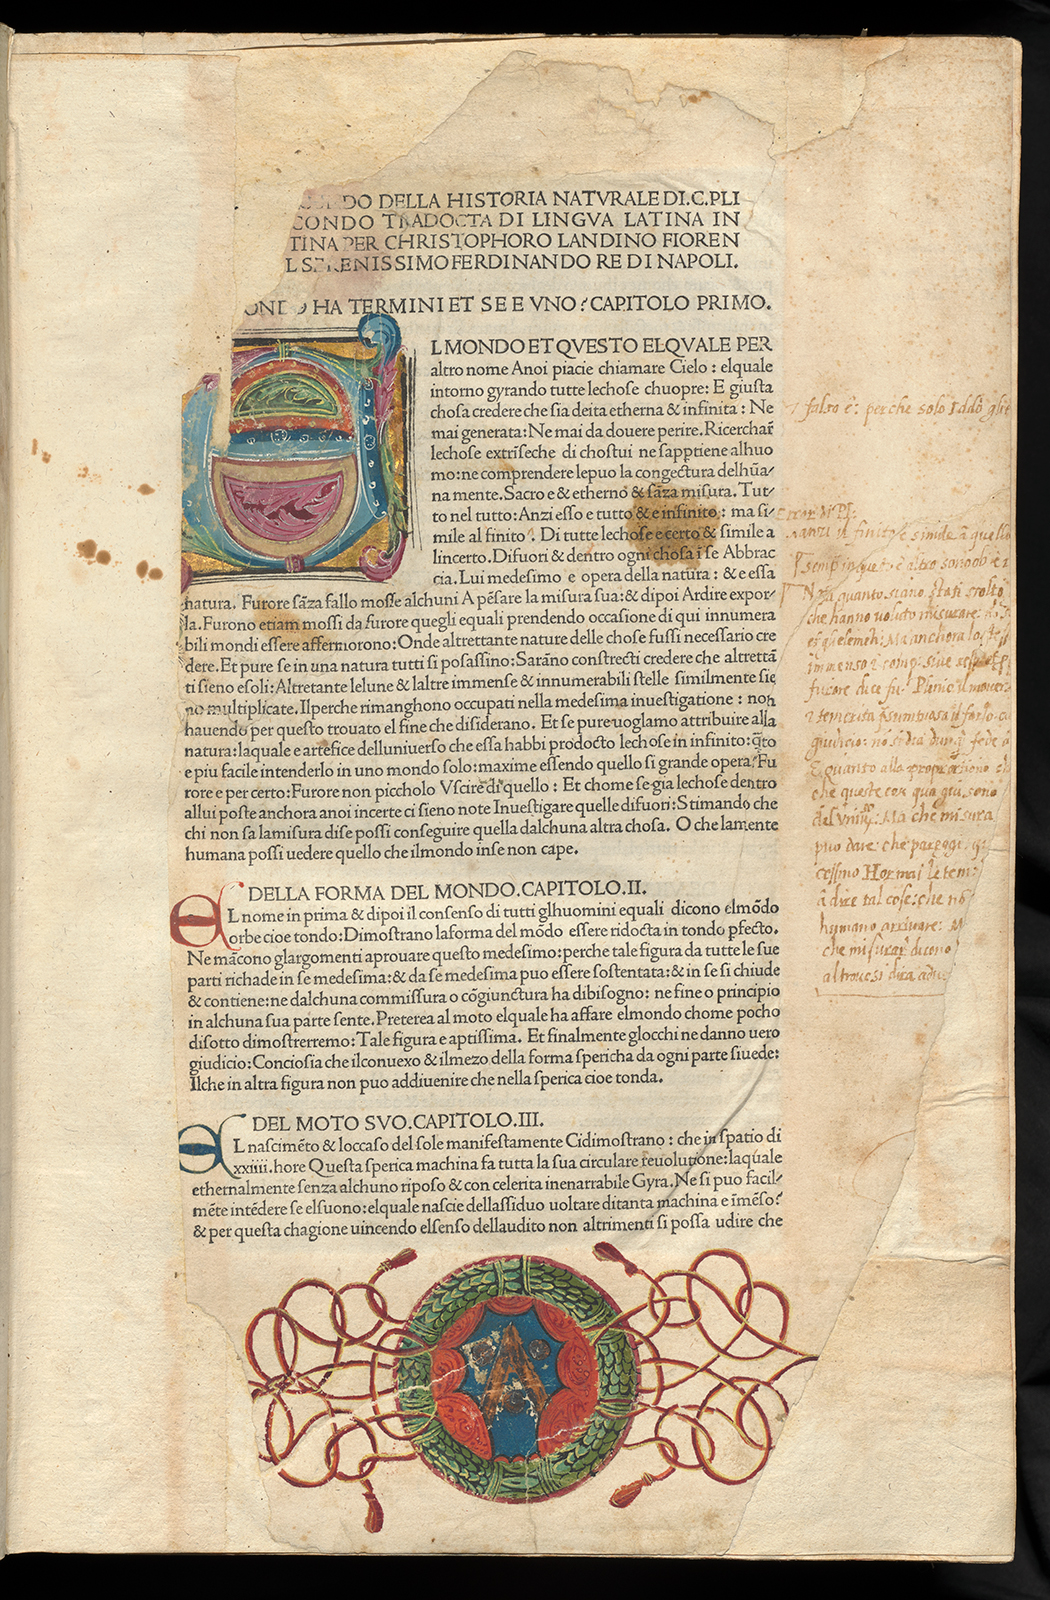 An illustrated manuscript page